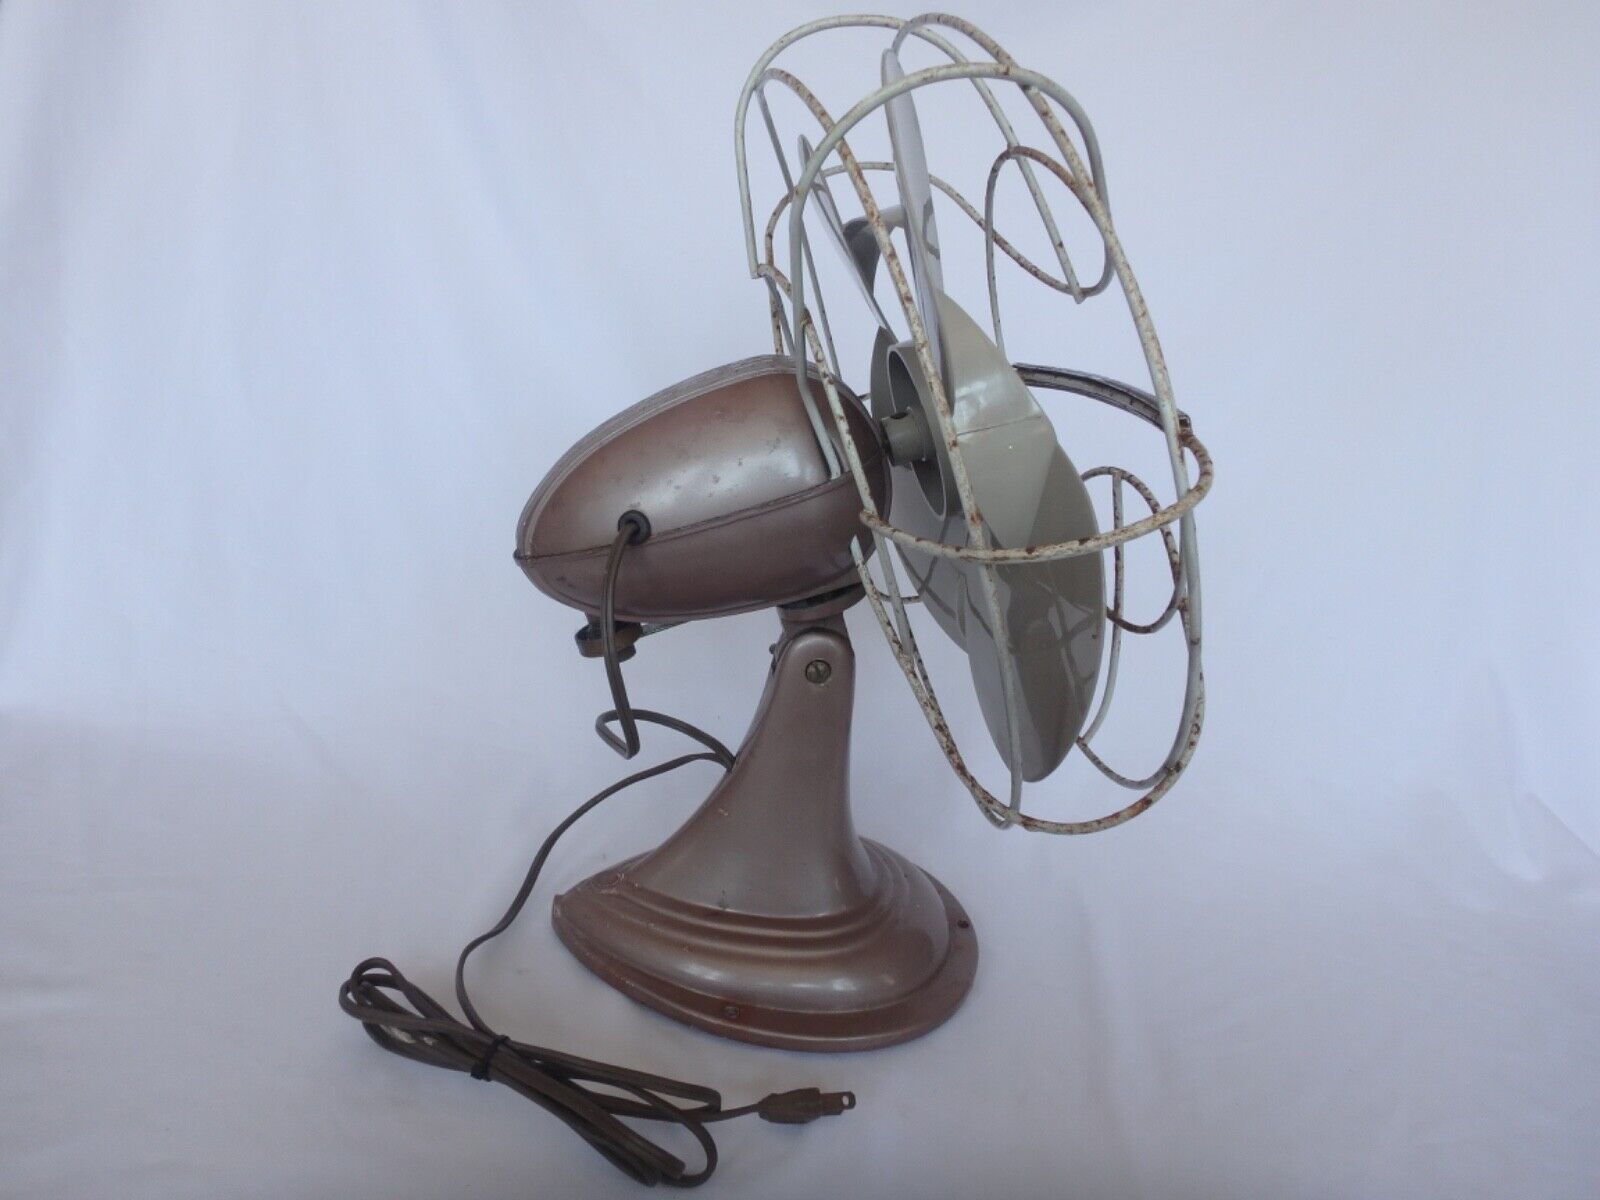 Vintage Fan Westinghouse Metal Mid Century WORKS TESTED 12-LA5A - Video Included